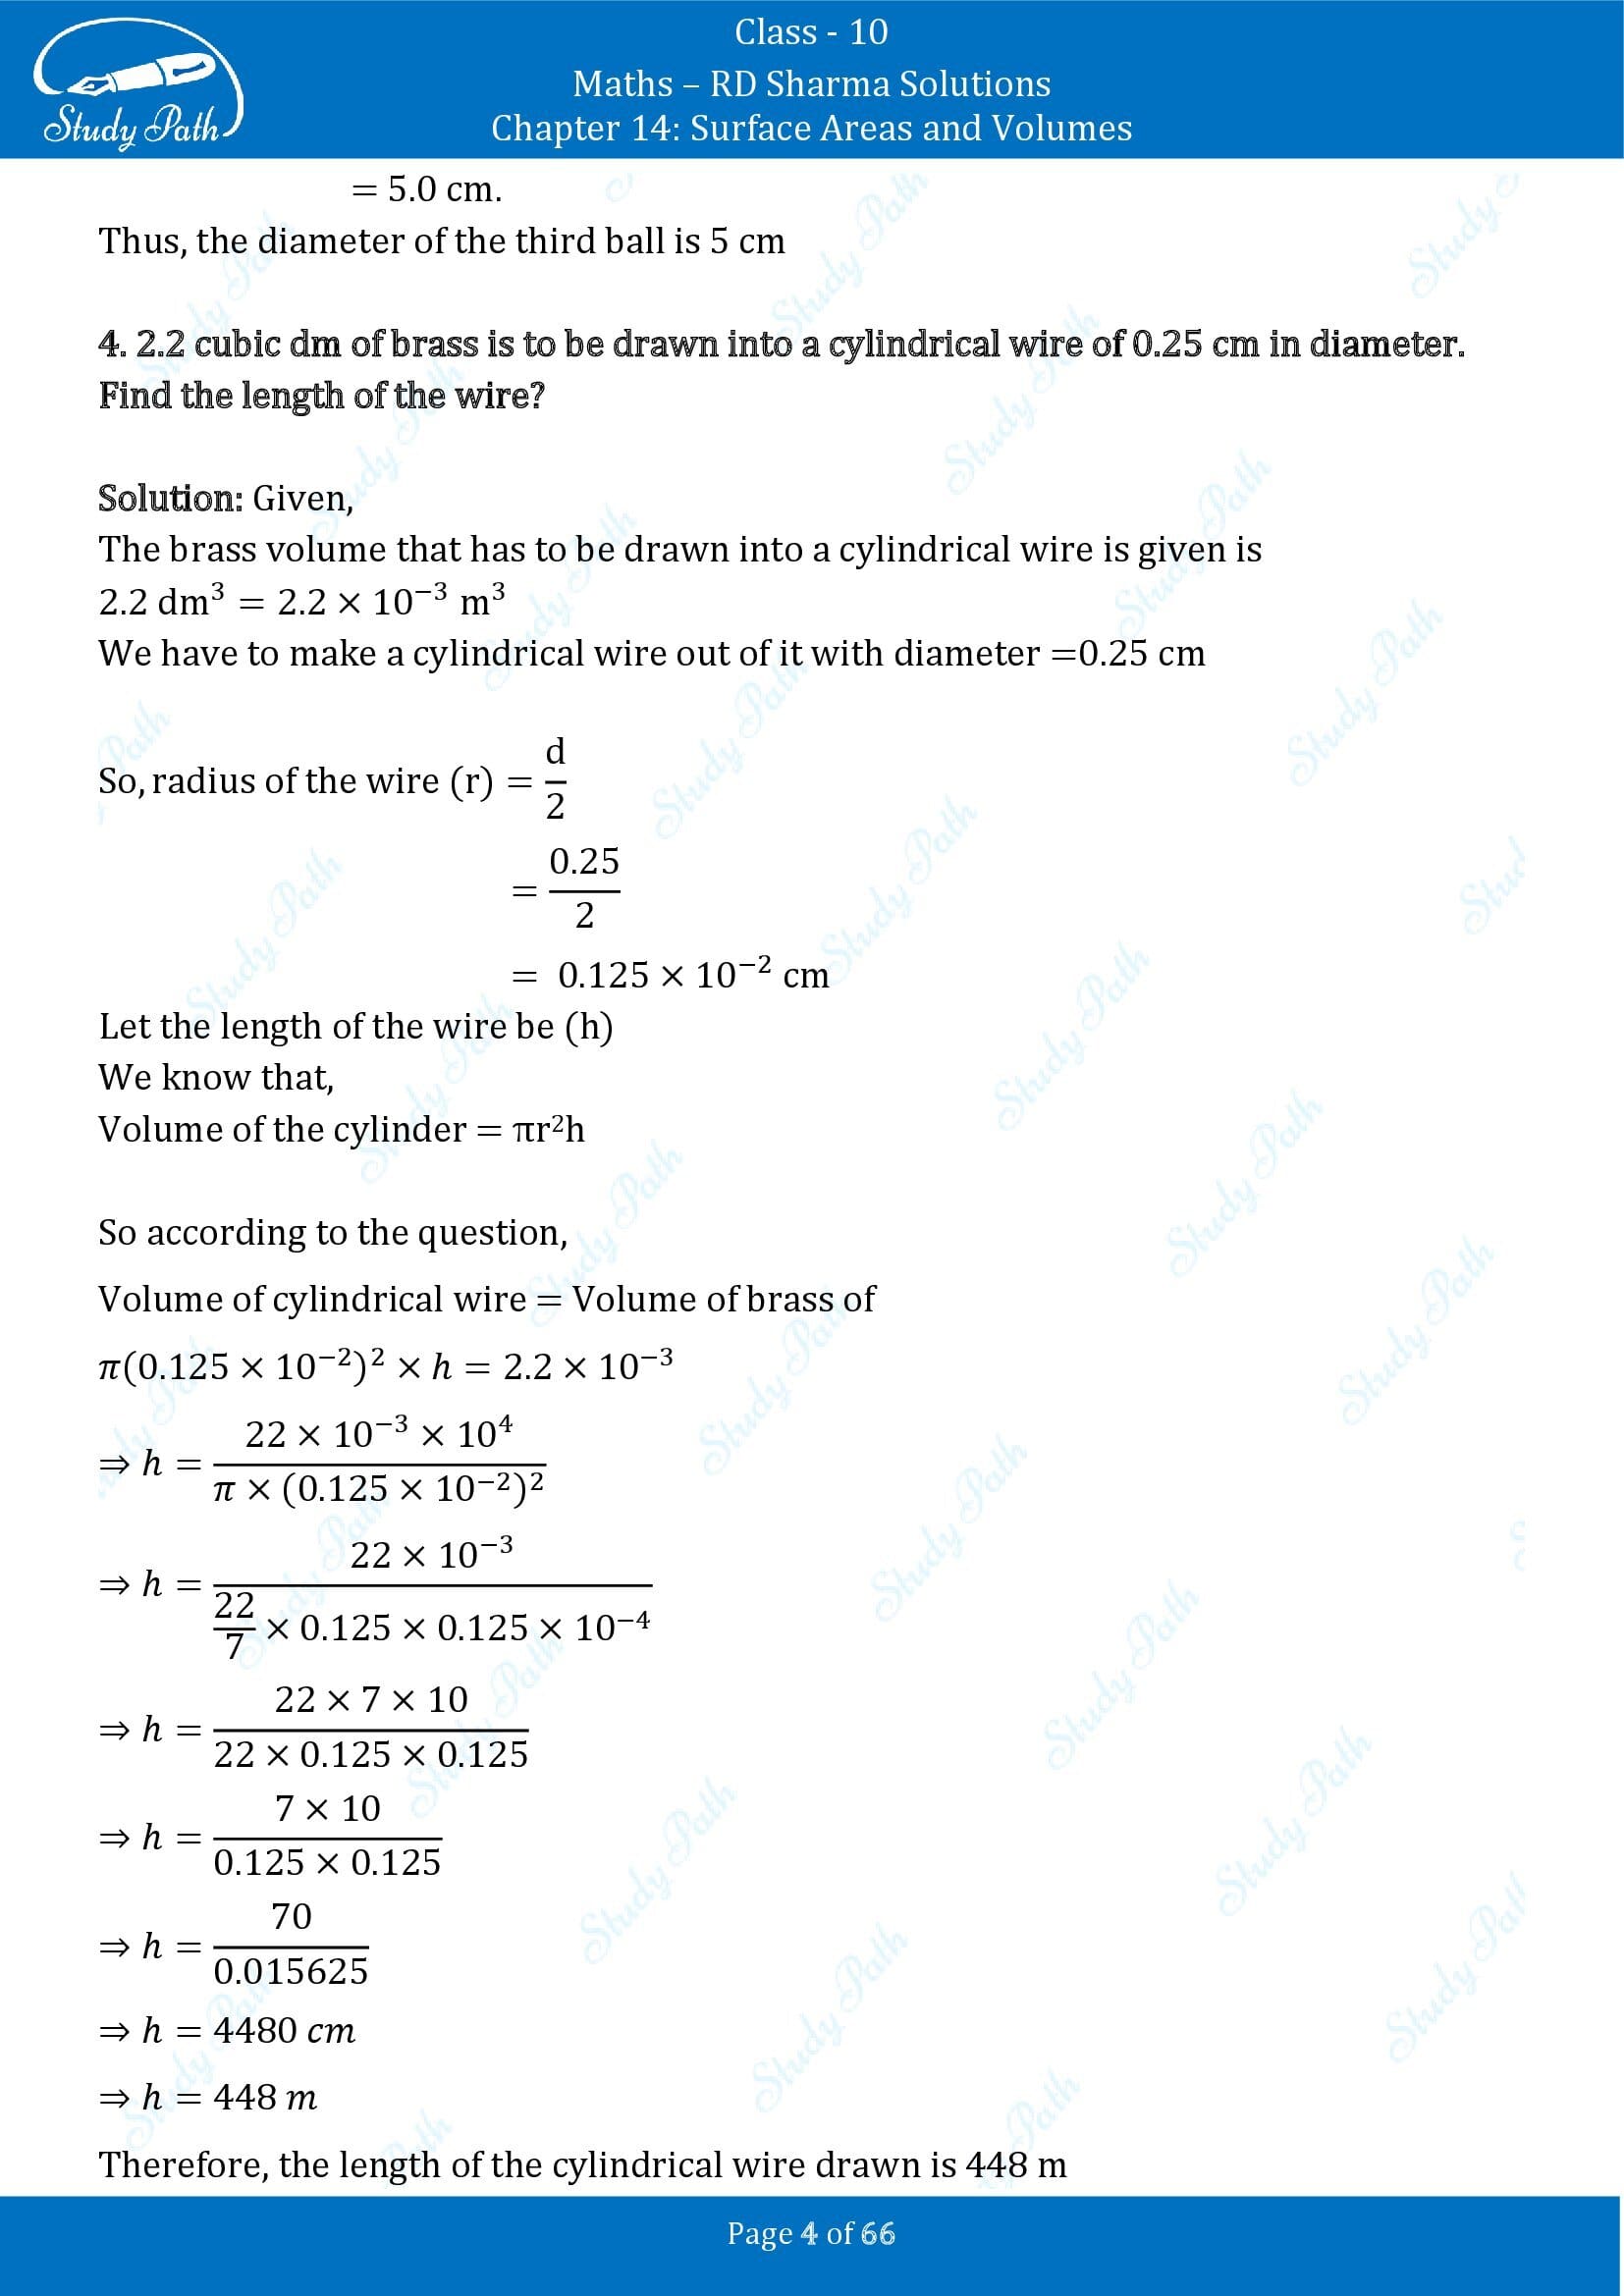 RD Sharma Solutions Class 10 Chapter 14 Surface Areas and Volumes Exercise 14.1 00004